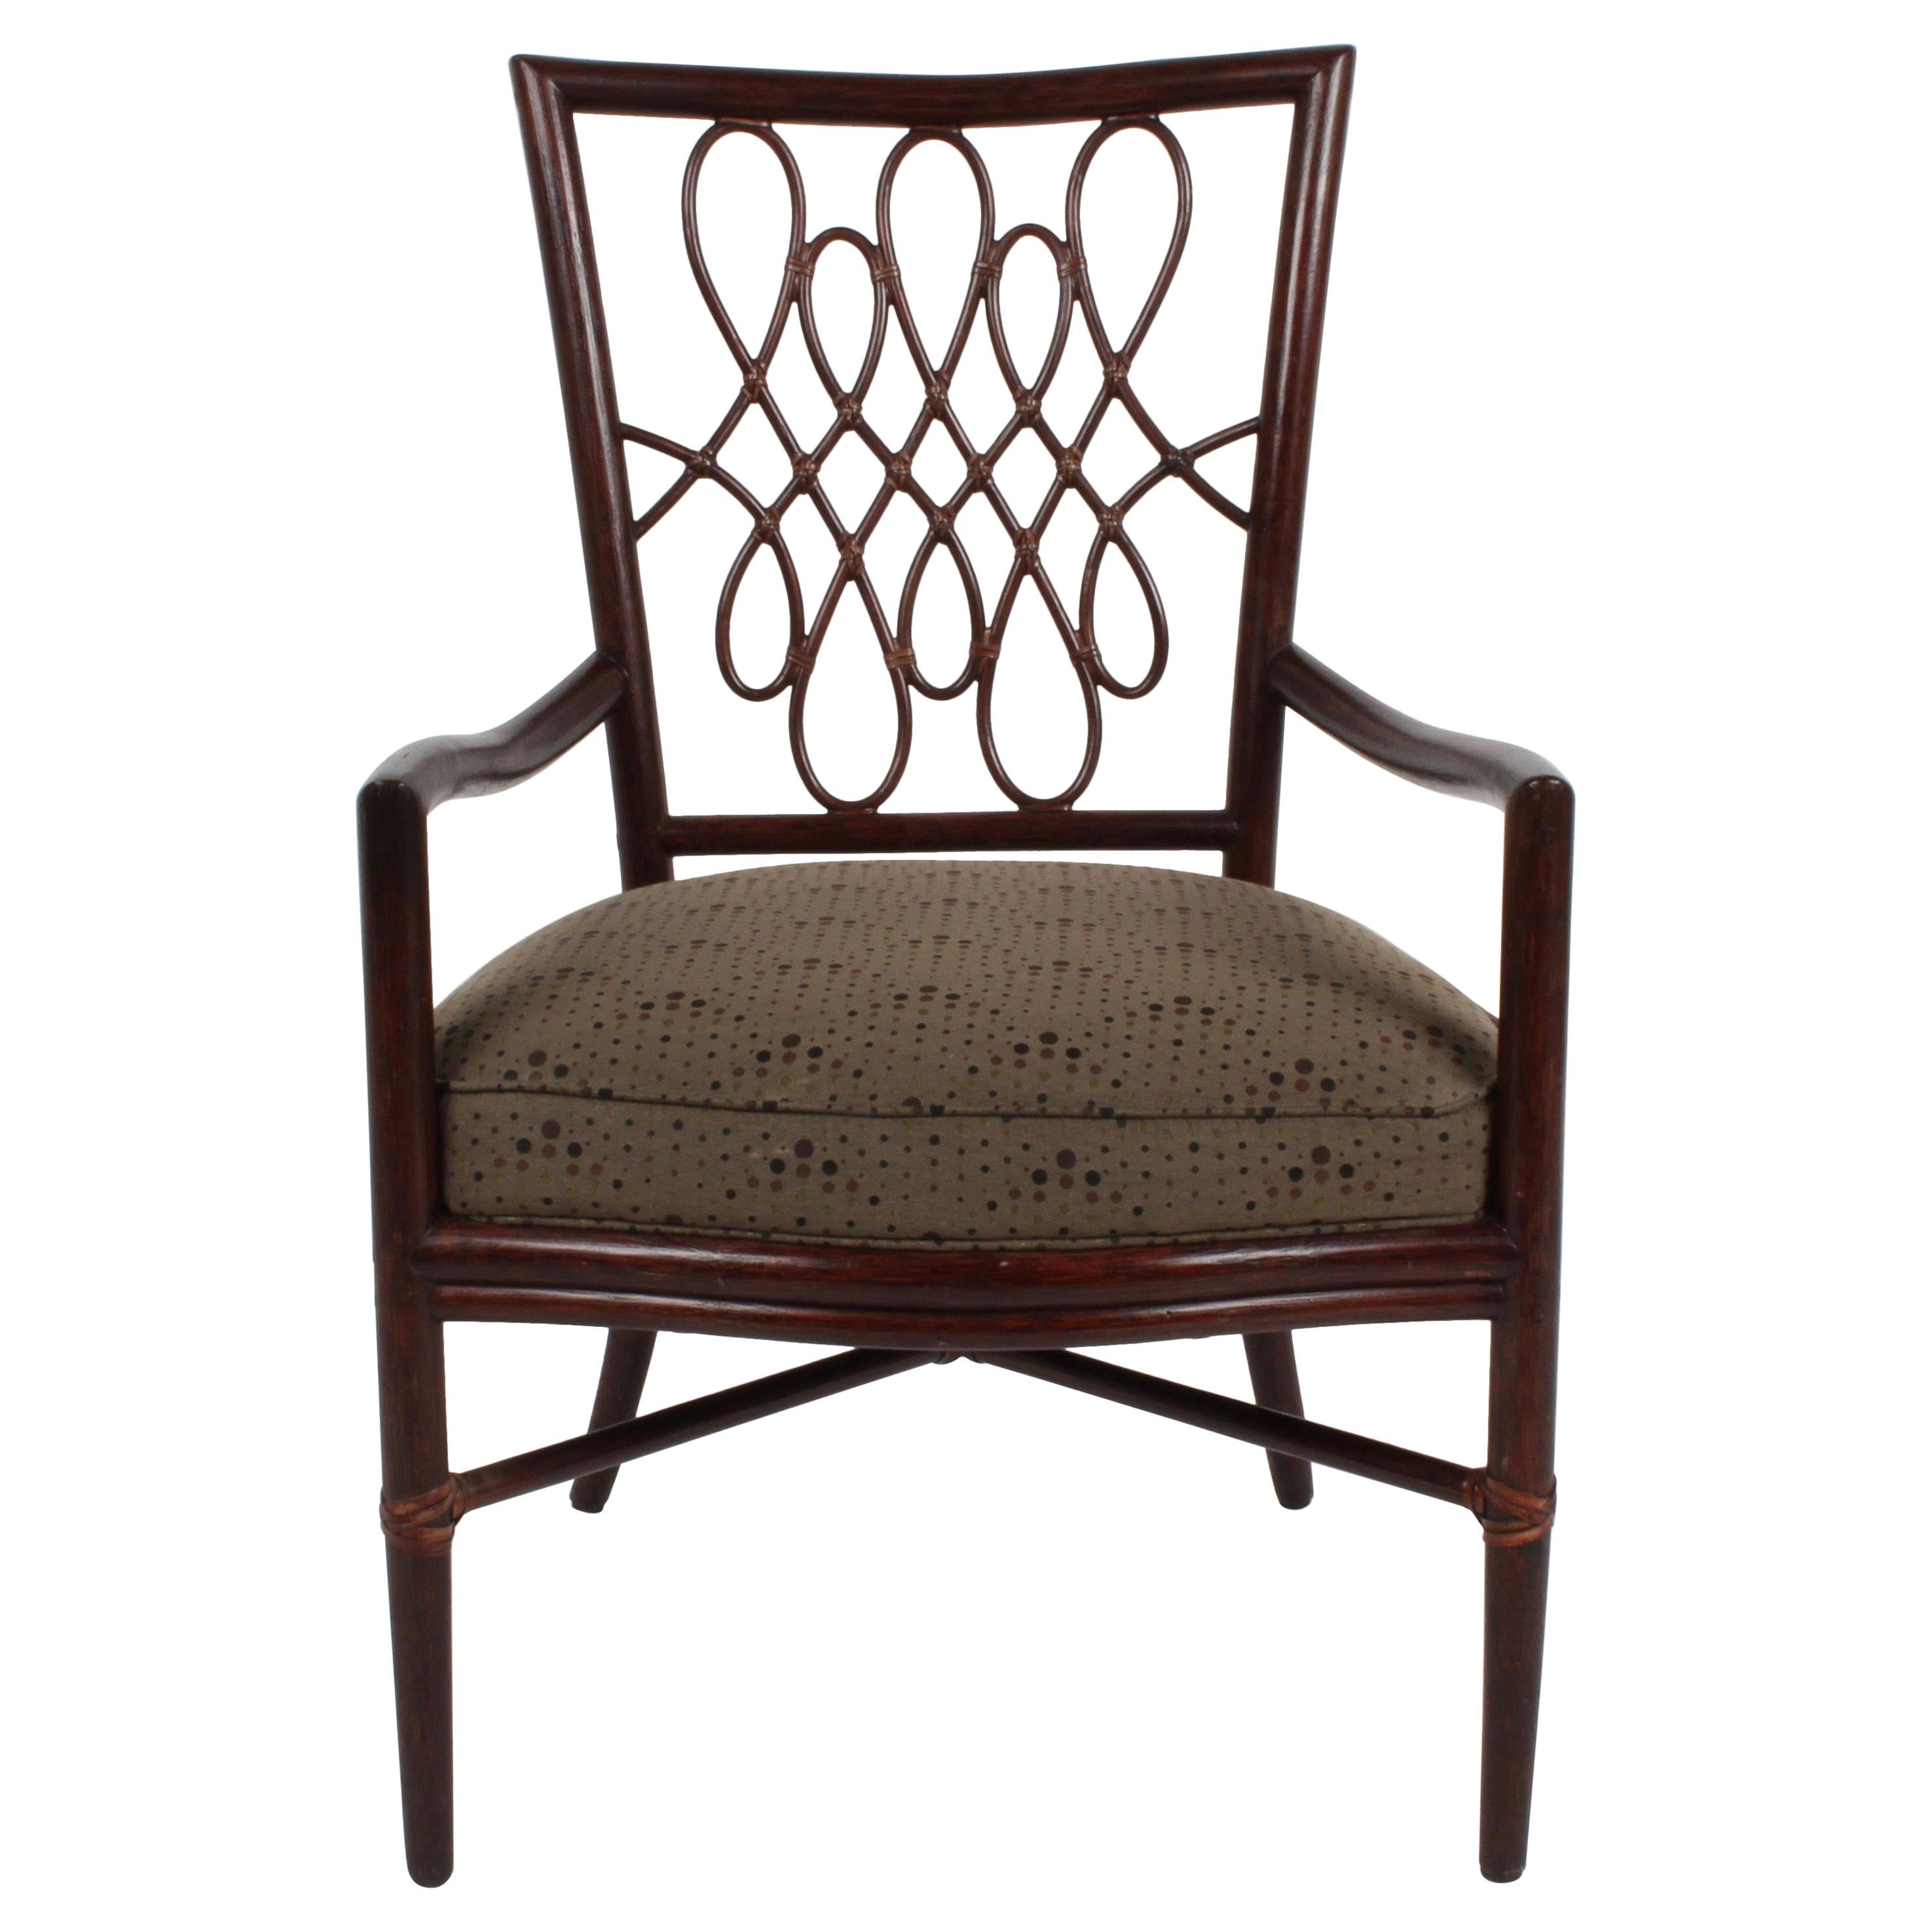 Barbara Barry for McGuire Rattan or Wicker Arm Desk, Dining or Occasional Chair